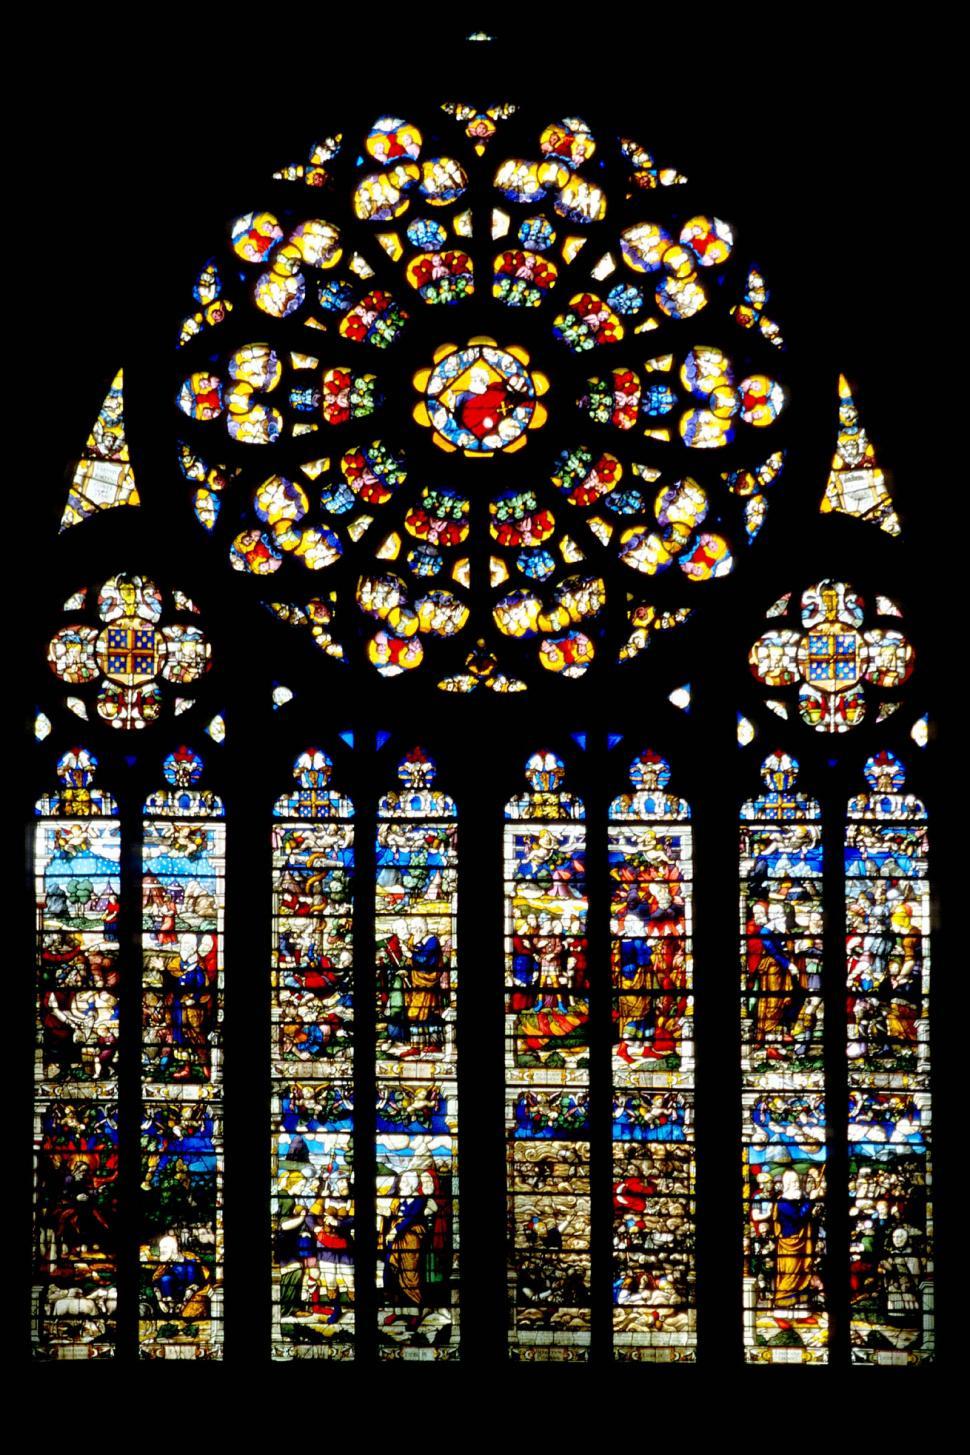 Free Image of Grand Stained Glass Window in Church 